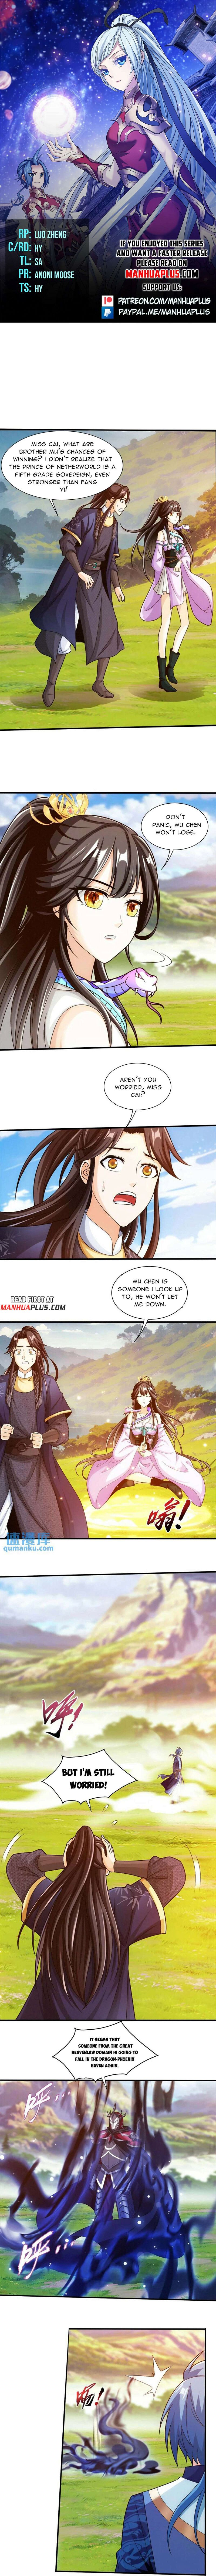 The Great Ruler Chapter 449 page 1